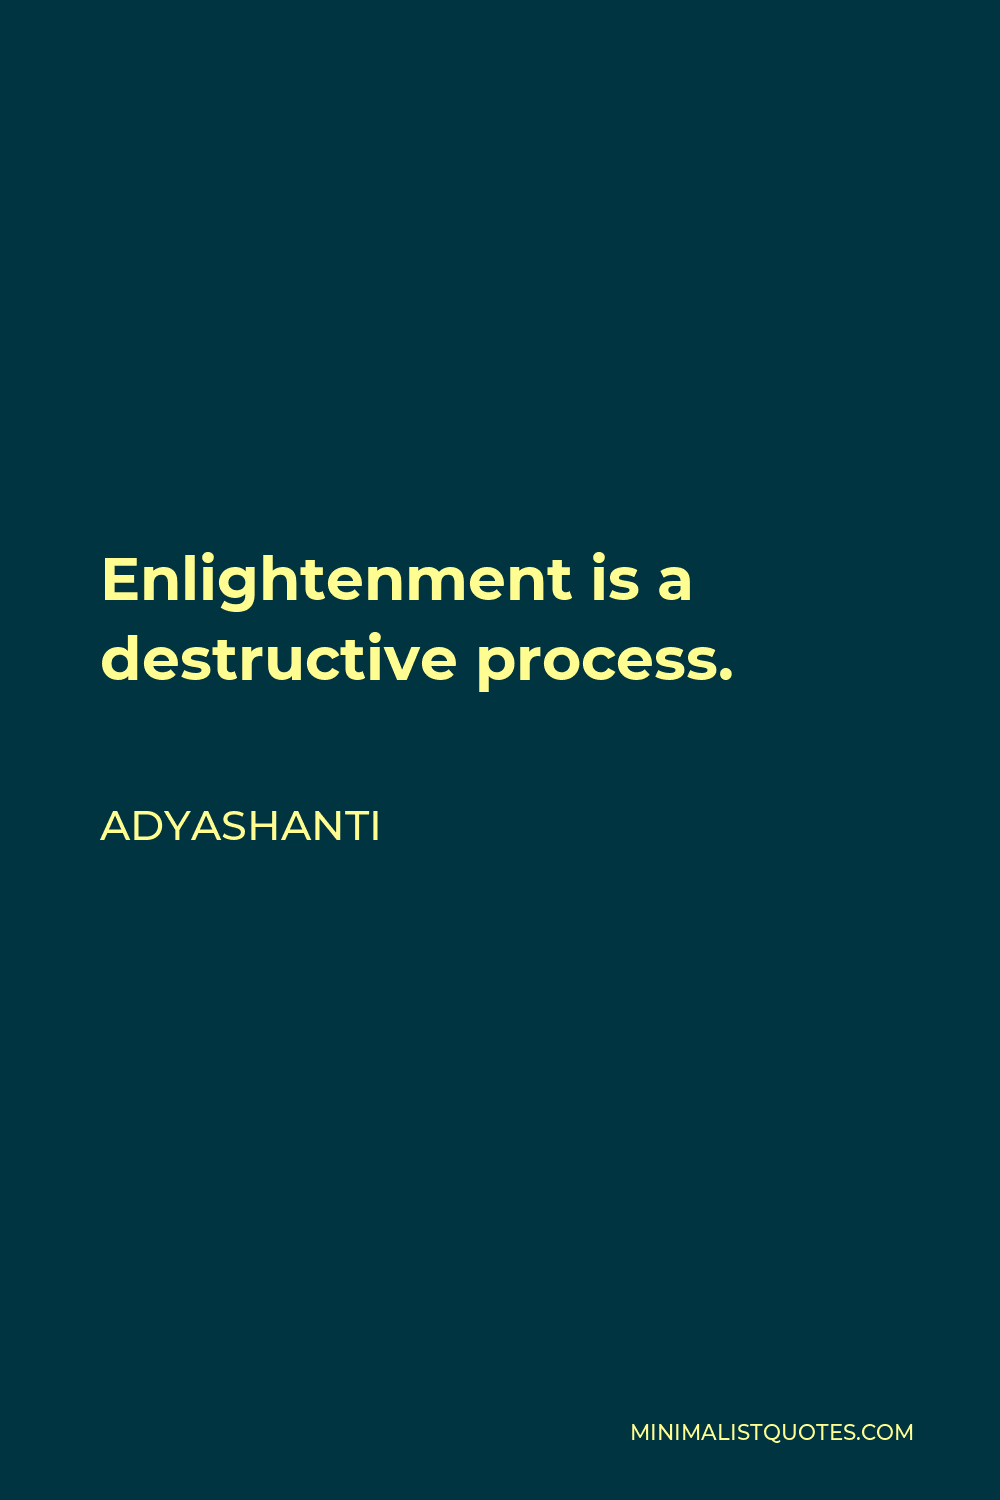 Adyashanti Quote - Enlightenment is a destructive process.